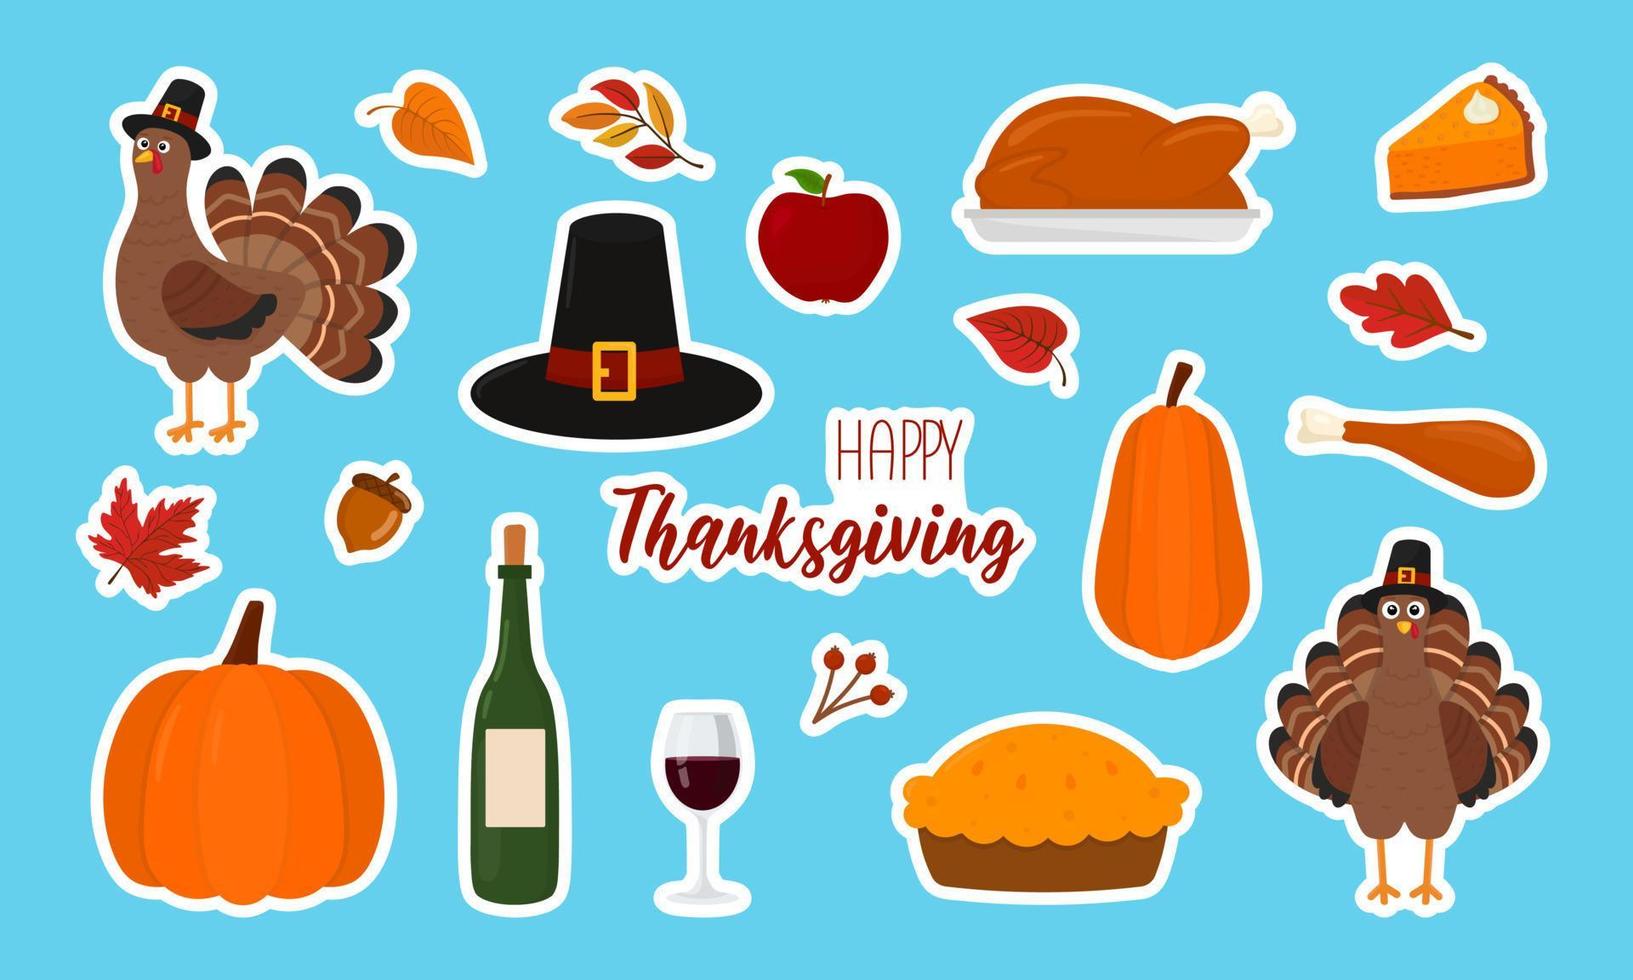 Stickers set with turkeys and holiday symbols on a blue background.  Great for greeting cards, design and more. Happy Thanksgiving. vector